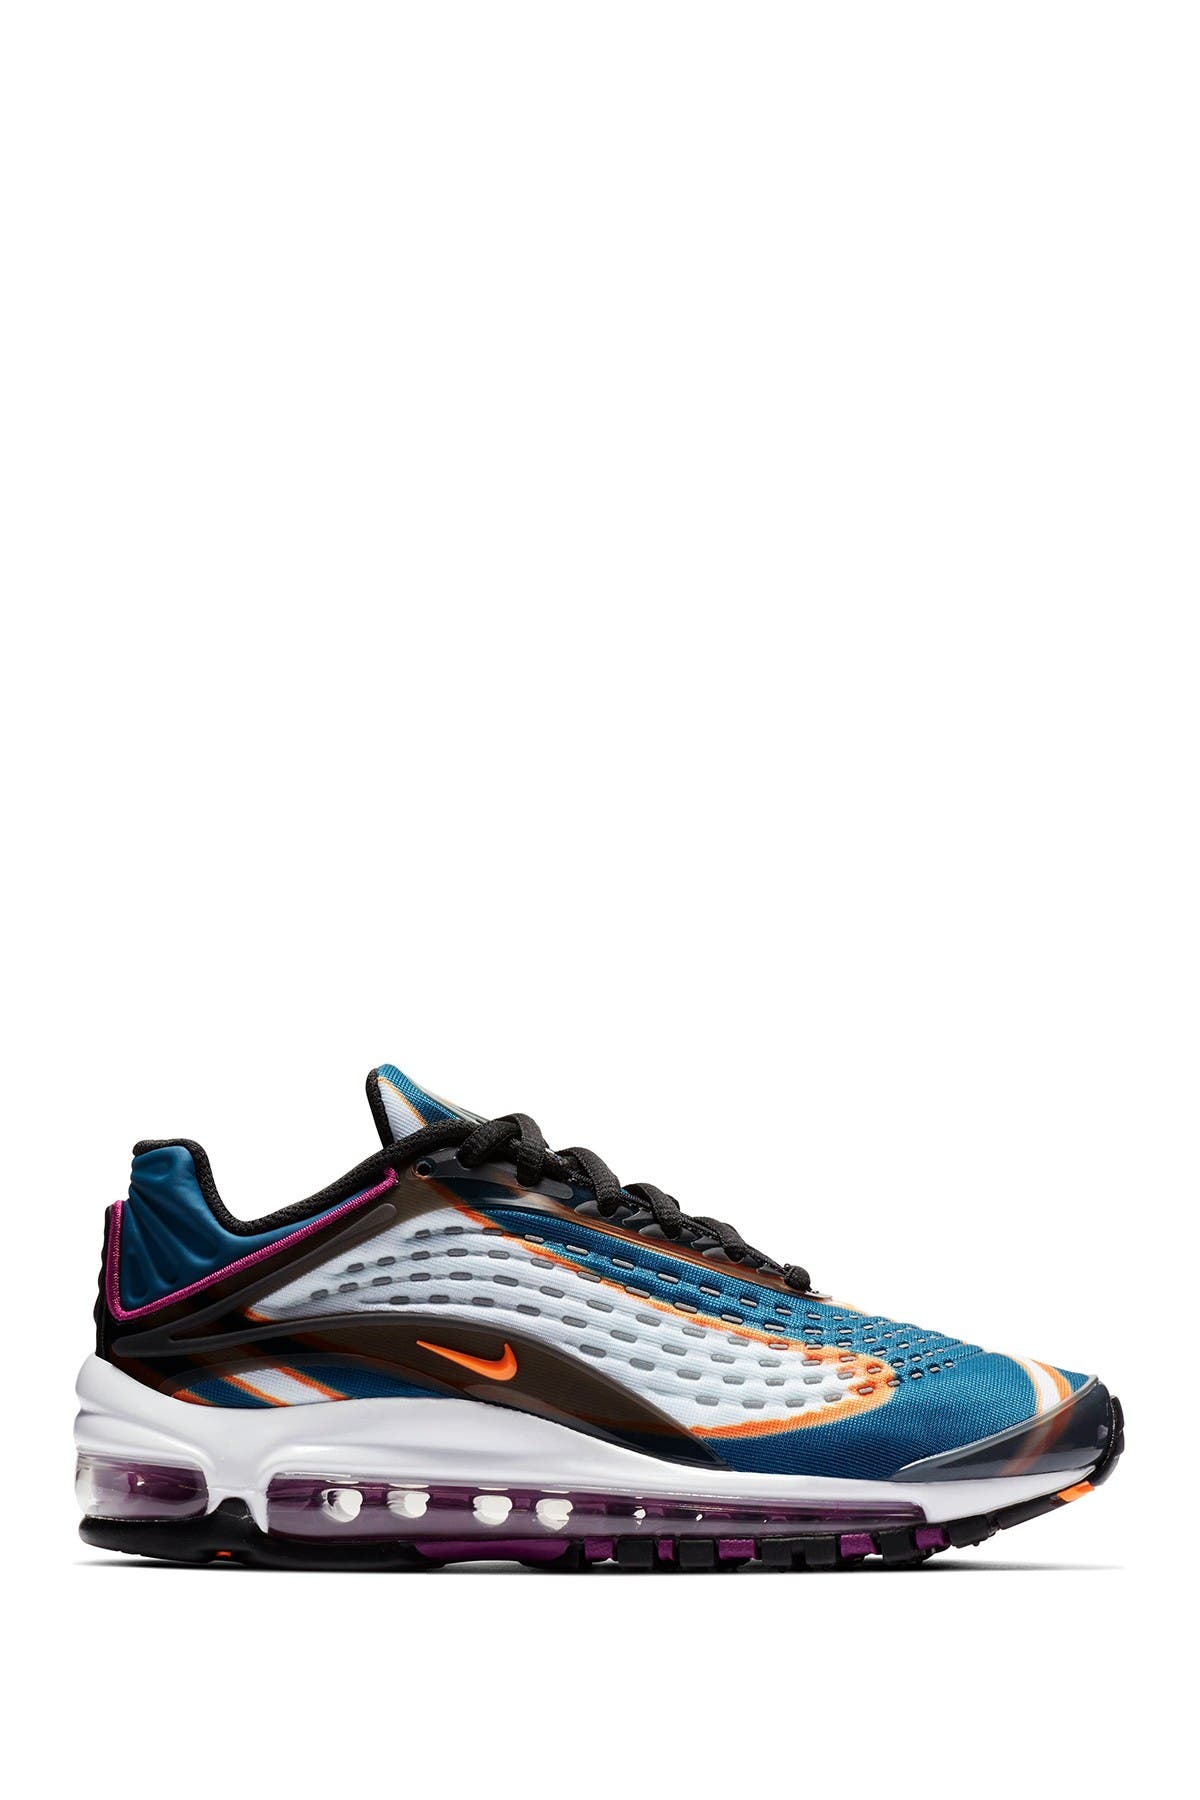 air max deluxe size 13